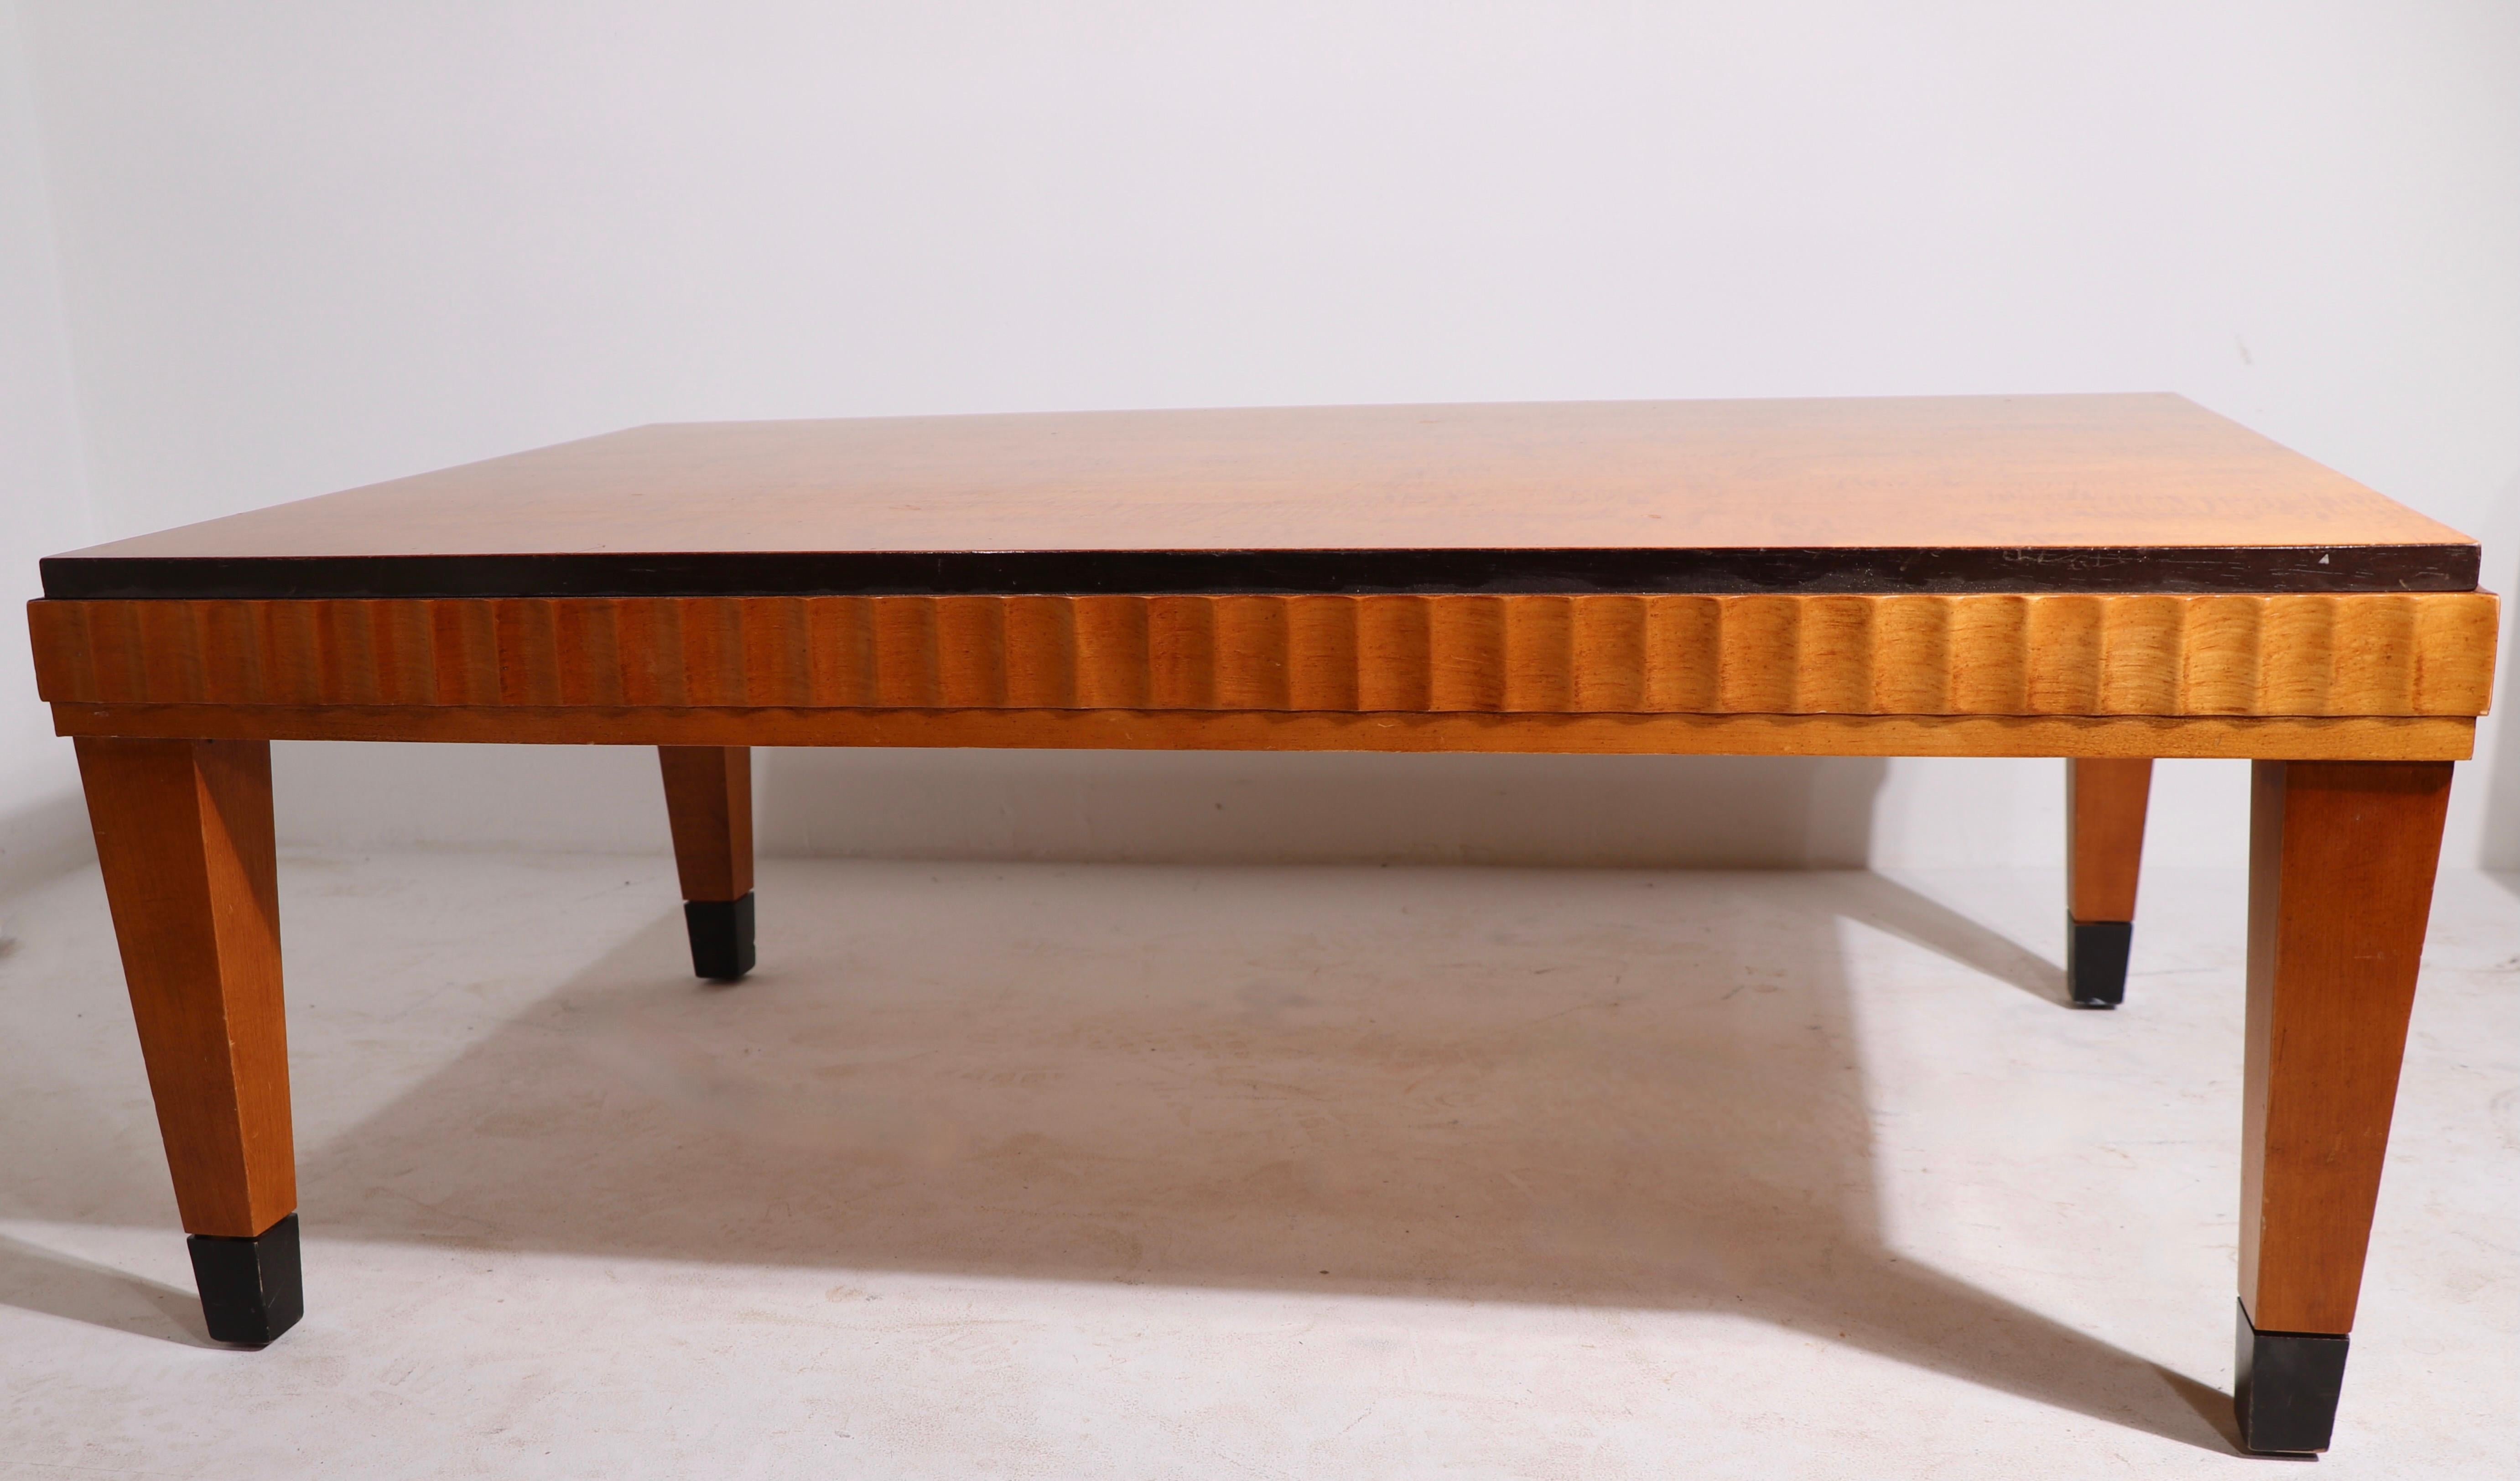 Classical Art Deco Style Coffee Table by Lane 1